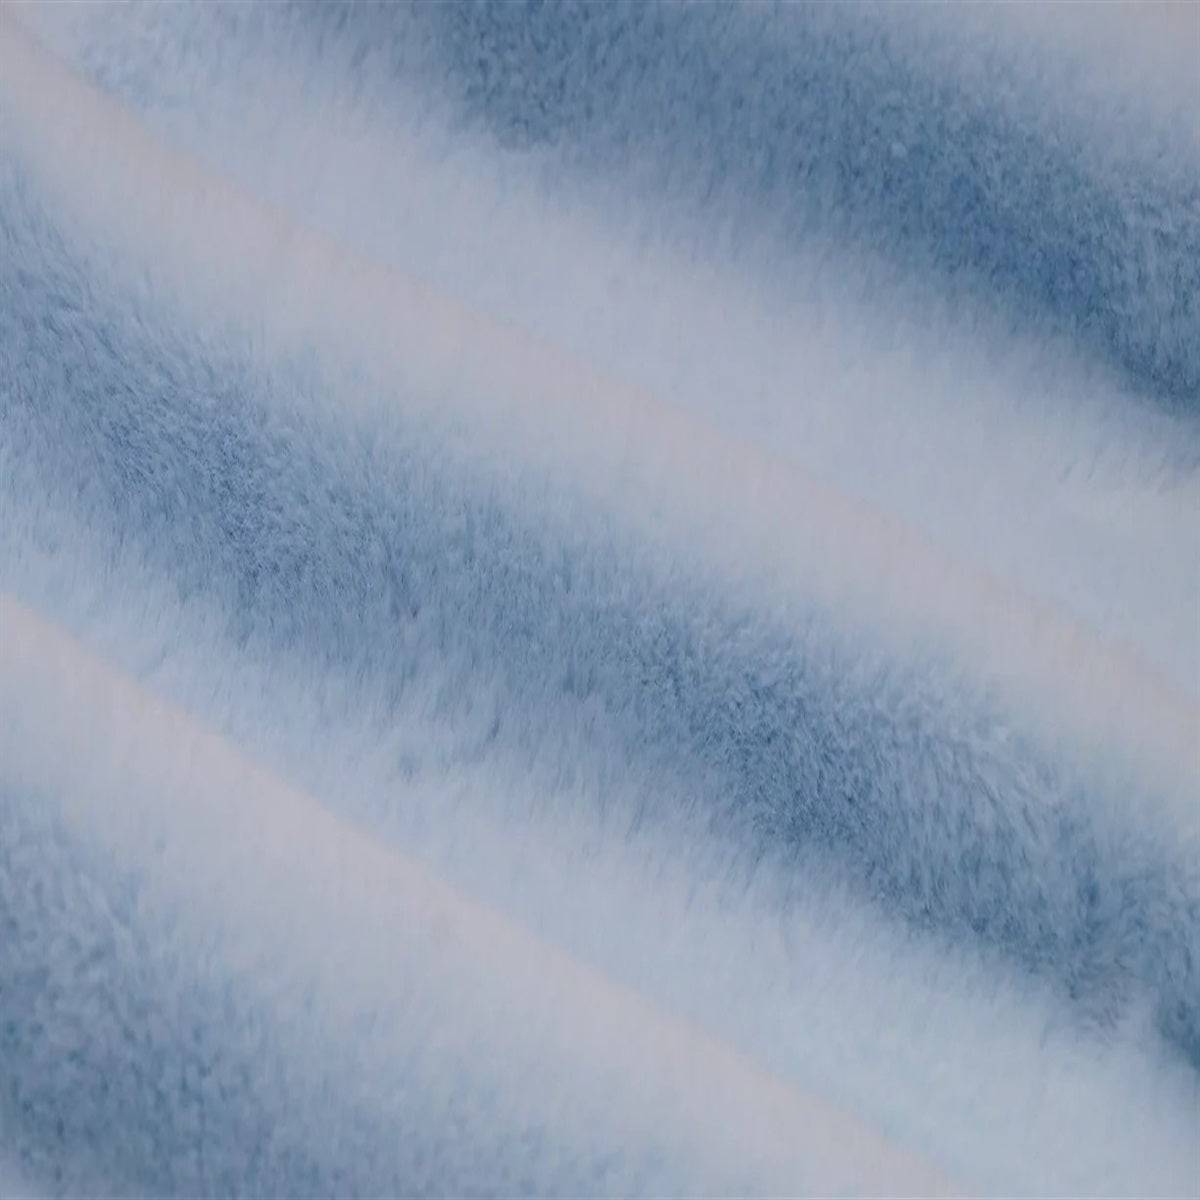 Bunny Thick Minky Fabric By The Roll (20 Yards)ICE FABRICSICE FABRICSBlueBy The Yard (60 inches Wide)Bunny Thick Minky Fabric By The Roll (20 Yards) ICE FABRICS Blue